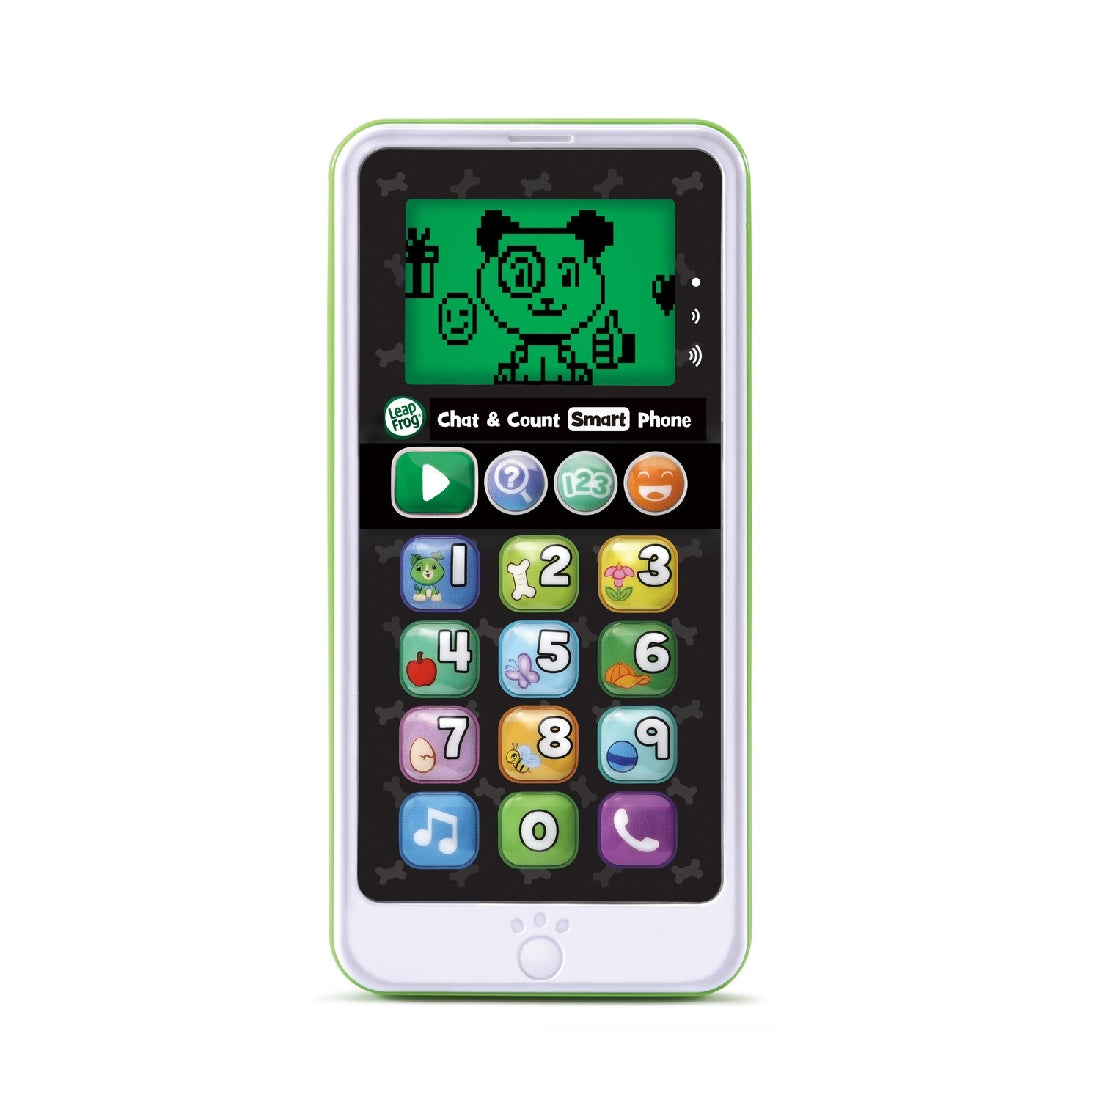 LEAP FROG CHAT & COUNT SMART PHONE